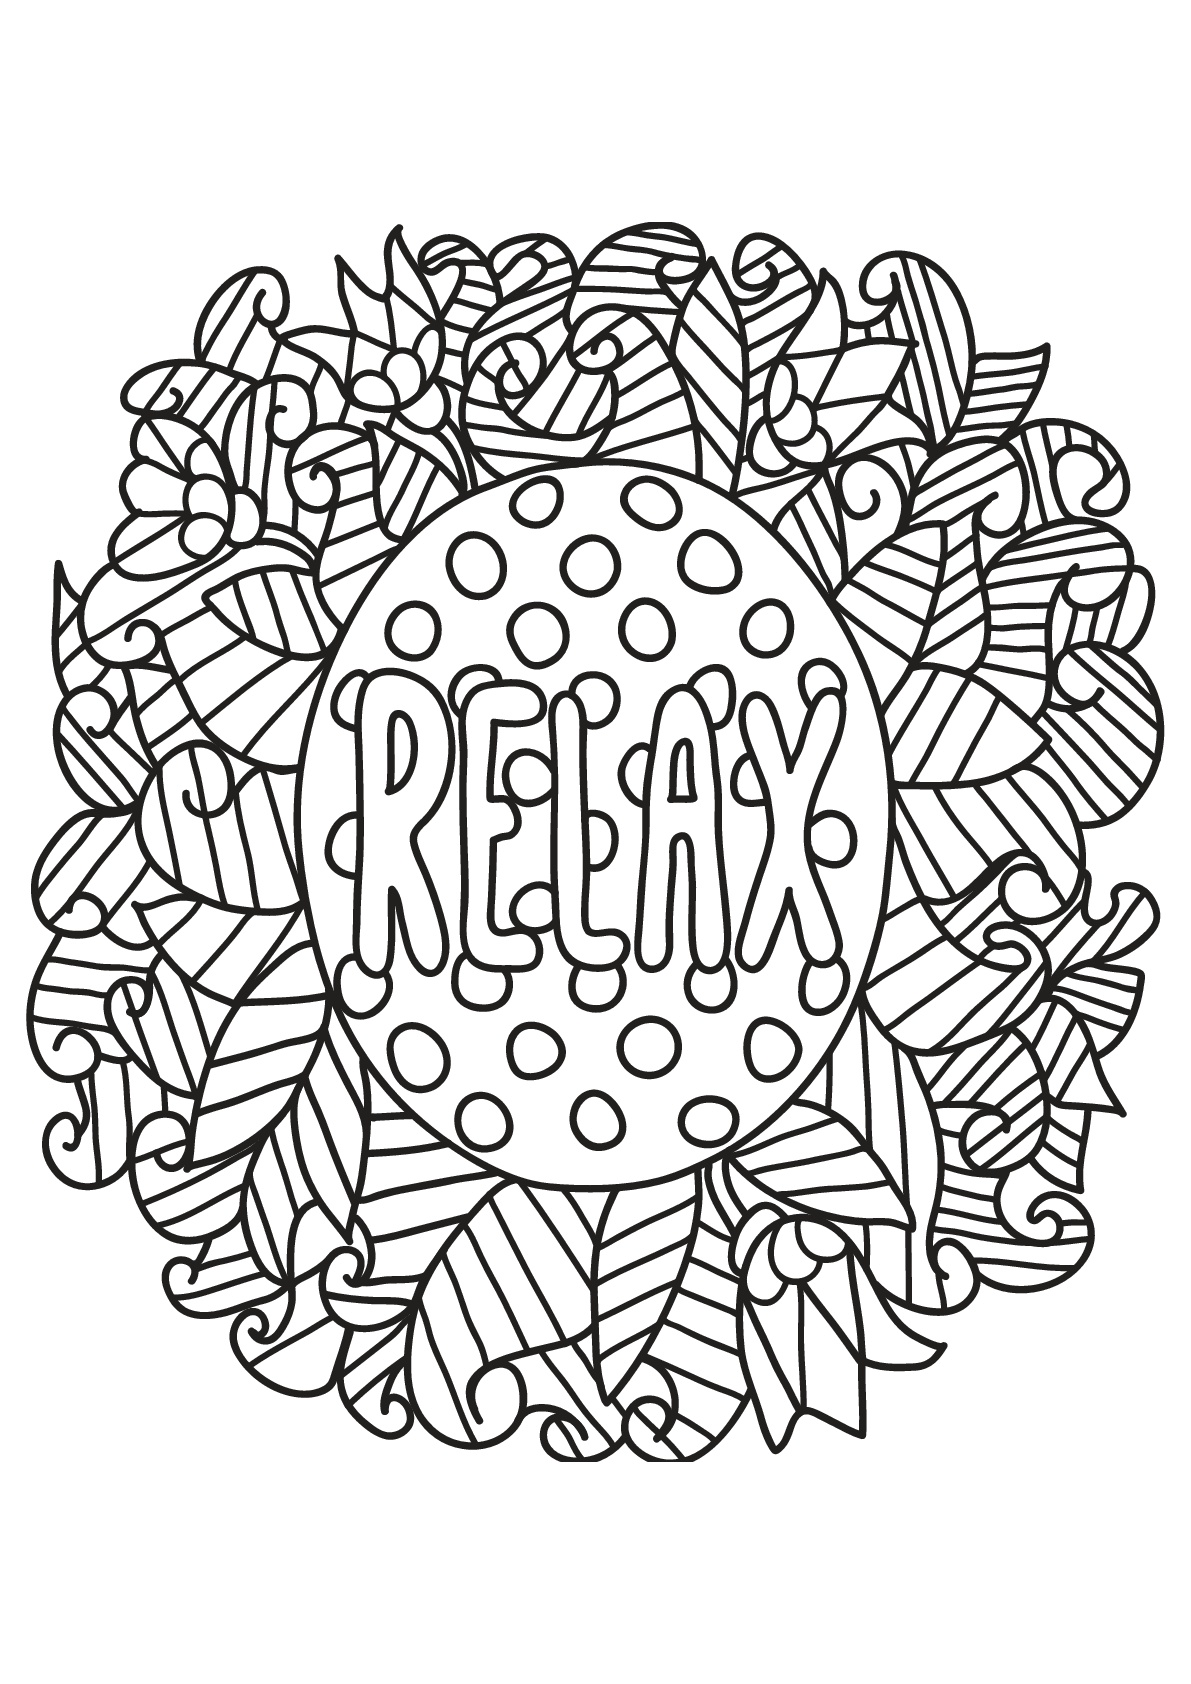 inspiring quotes Adult Coloring Pagesjustcolor.net